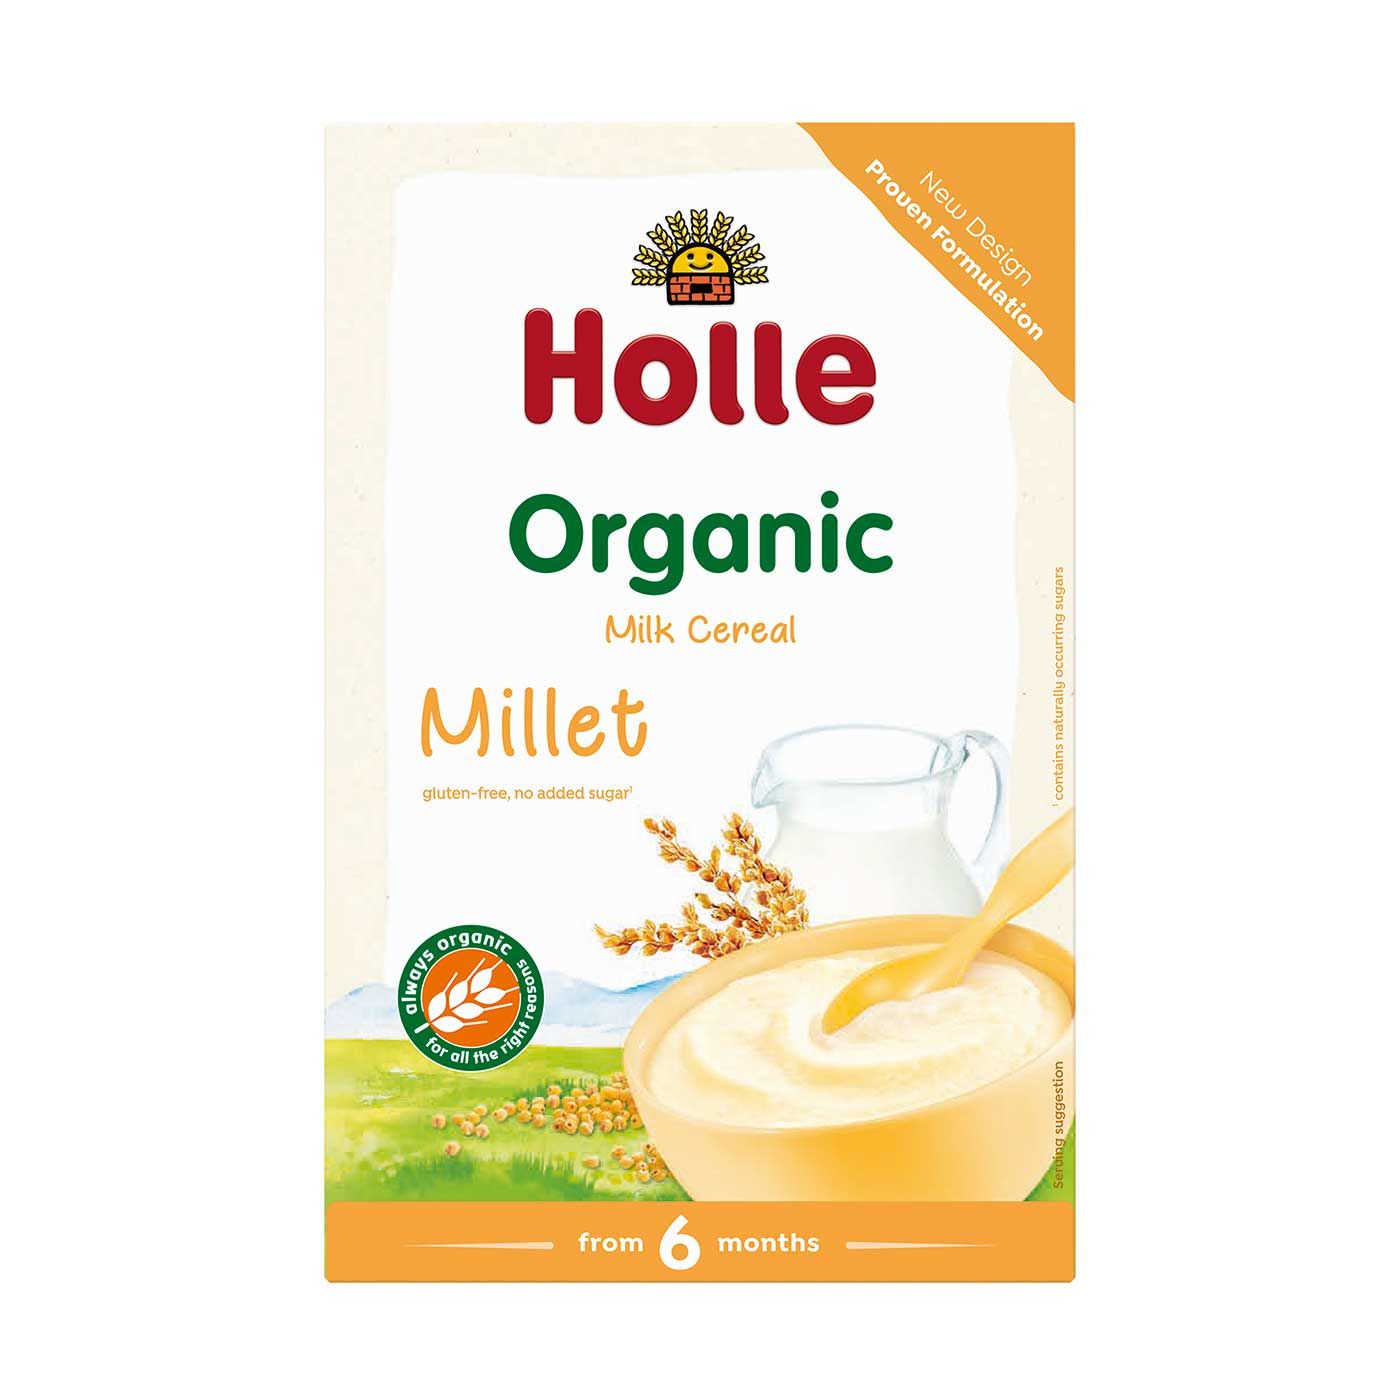 Holle Organic Milk Cereal with Millet 250g - 1